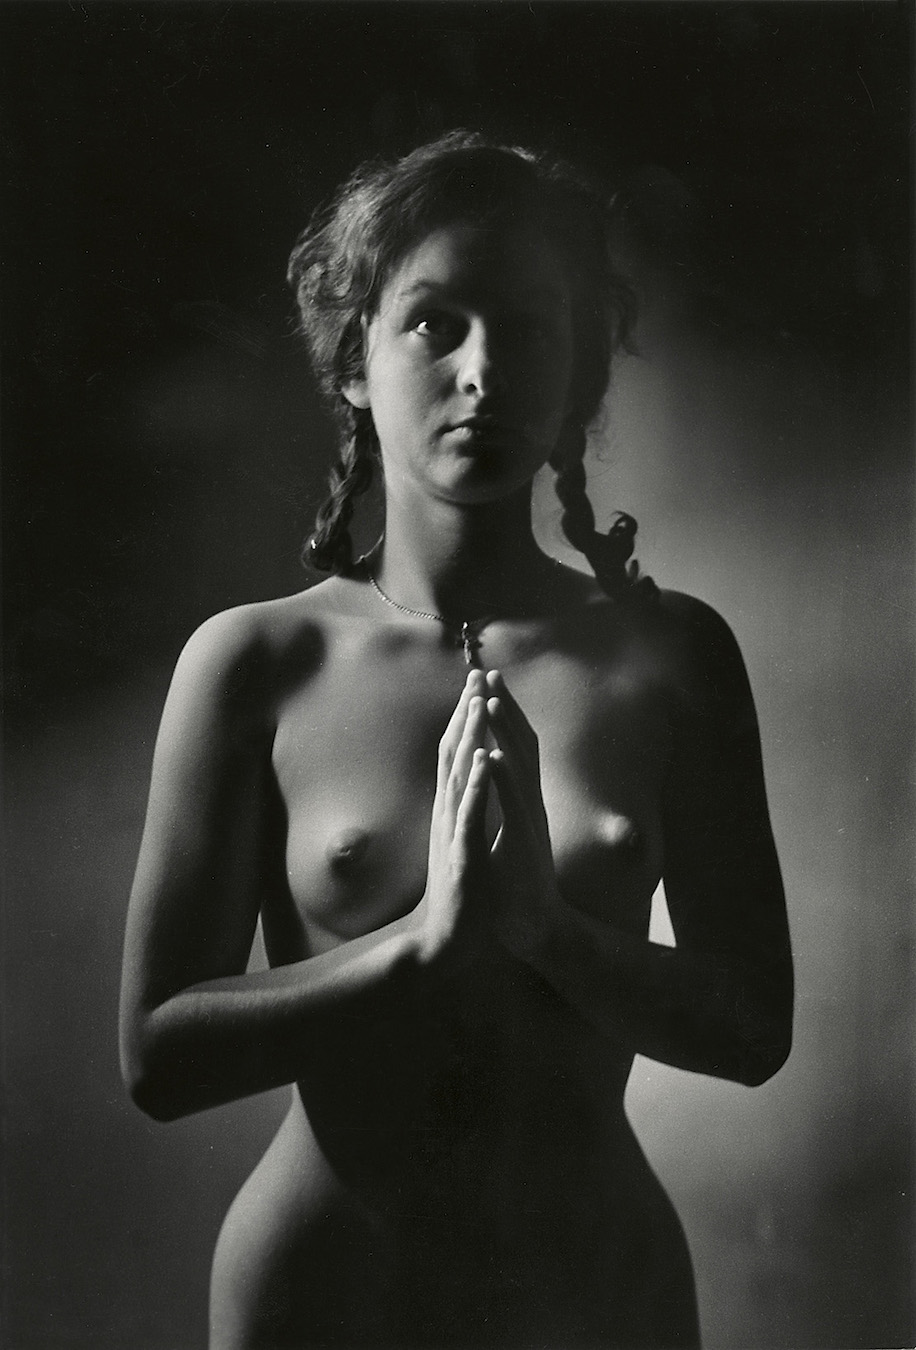 Praying Nude and Nude, from the series “Heliography”